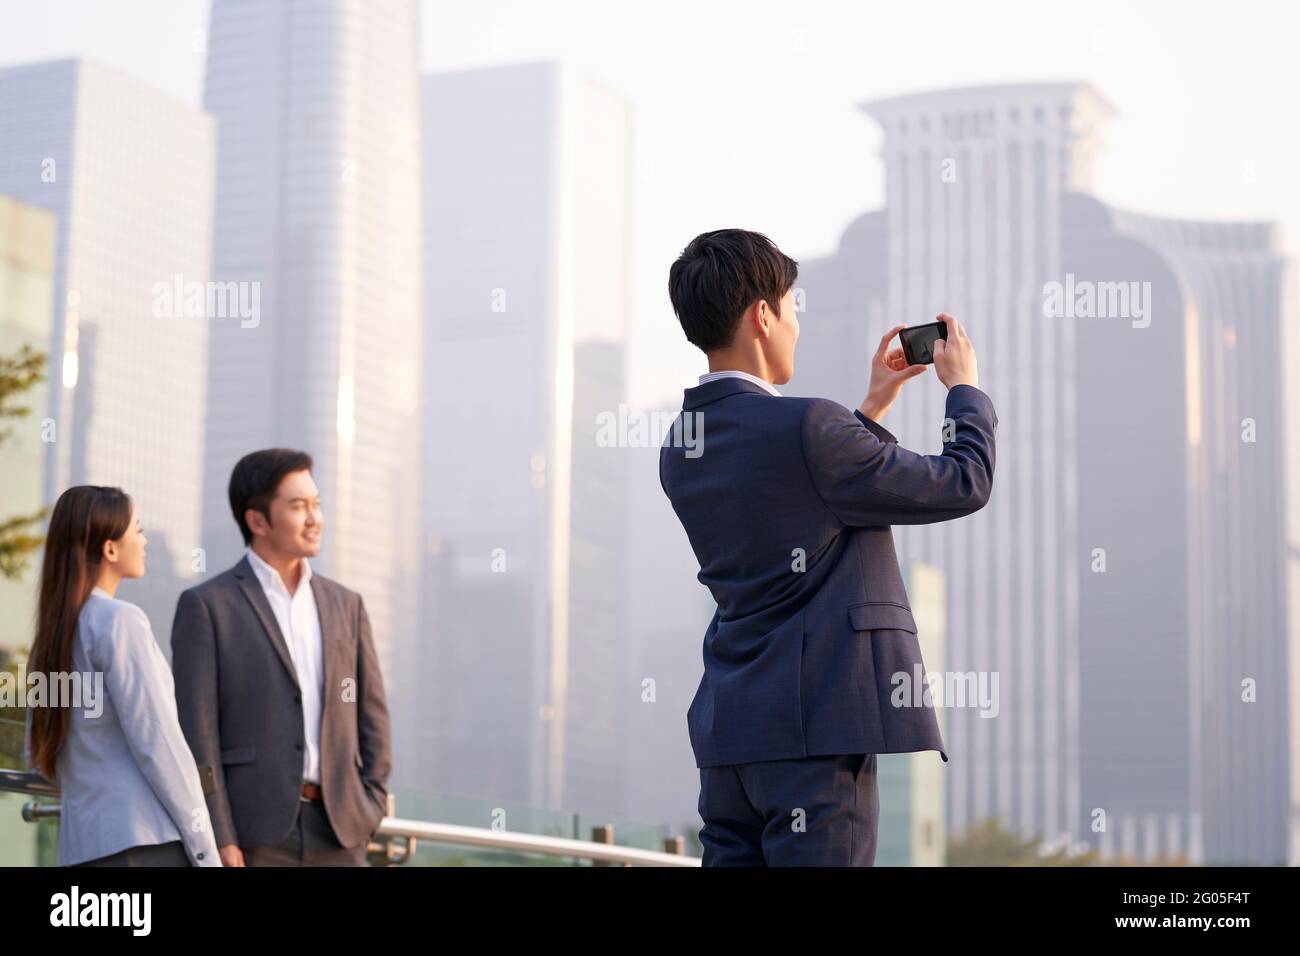 young asian business man taking a picture of the city using cellphone Stock Photo